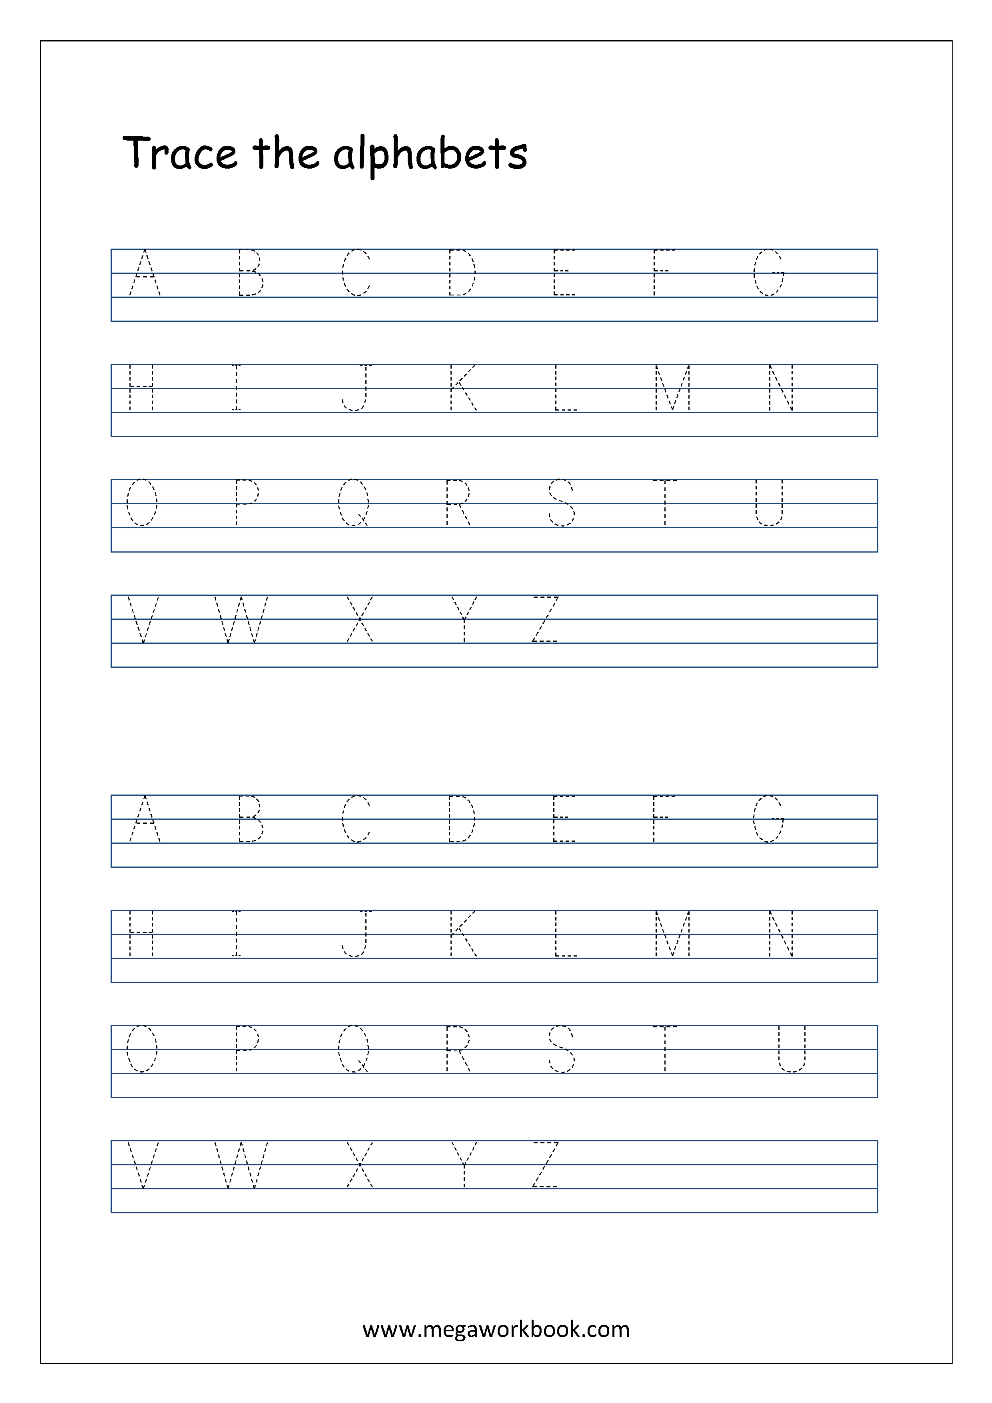 English Worksheet - Alphabet Tracing In 4 Lines - Capital inside Tracing Letters A To Z